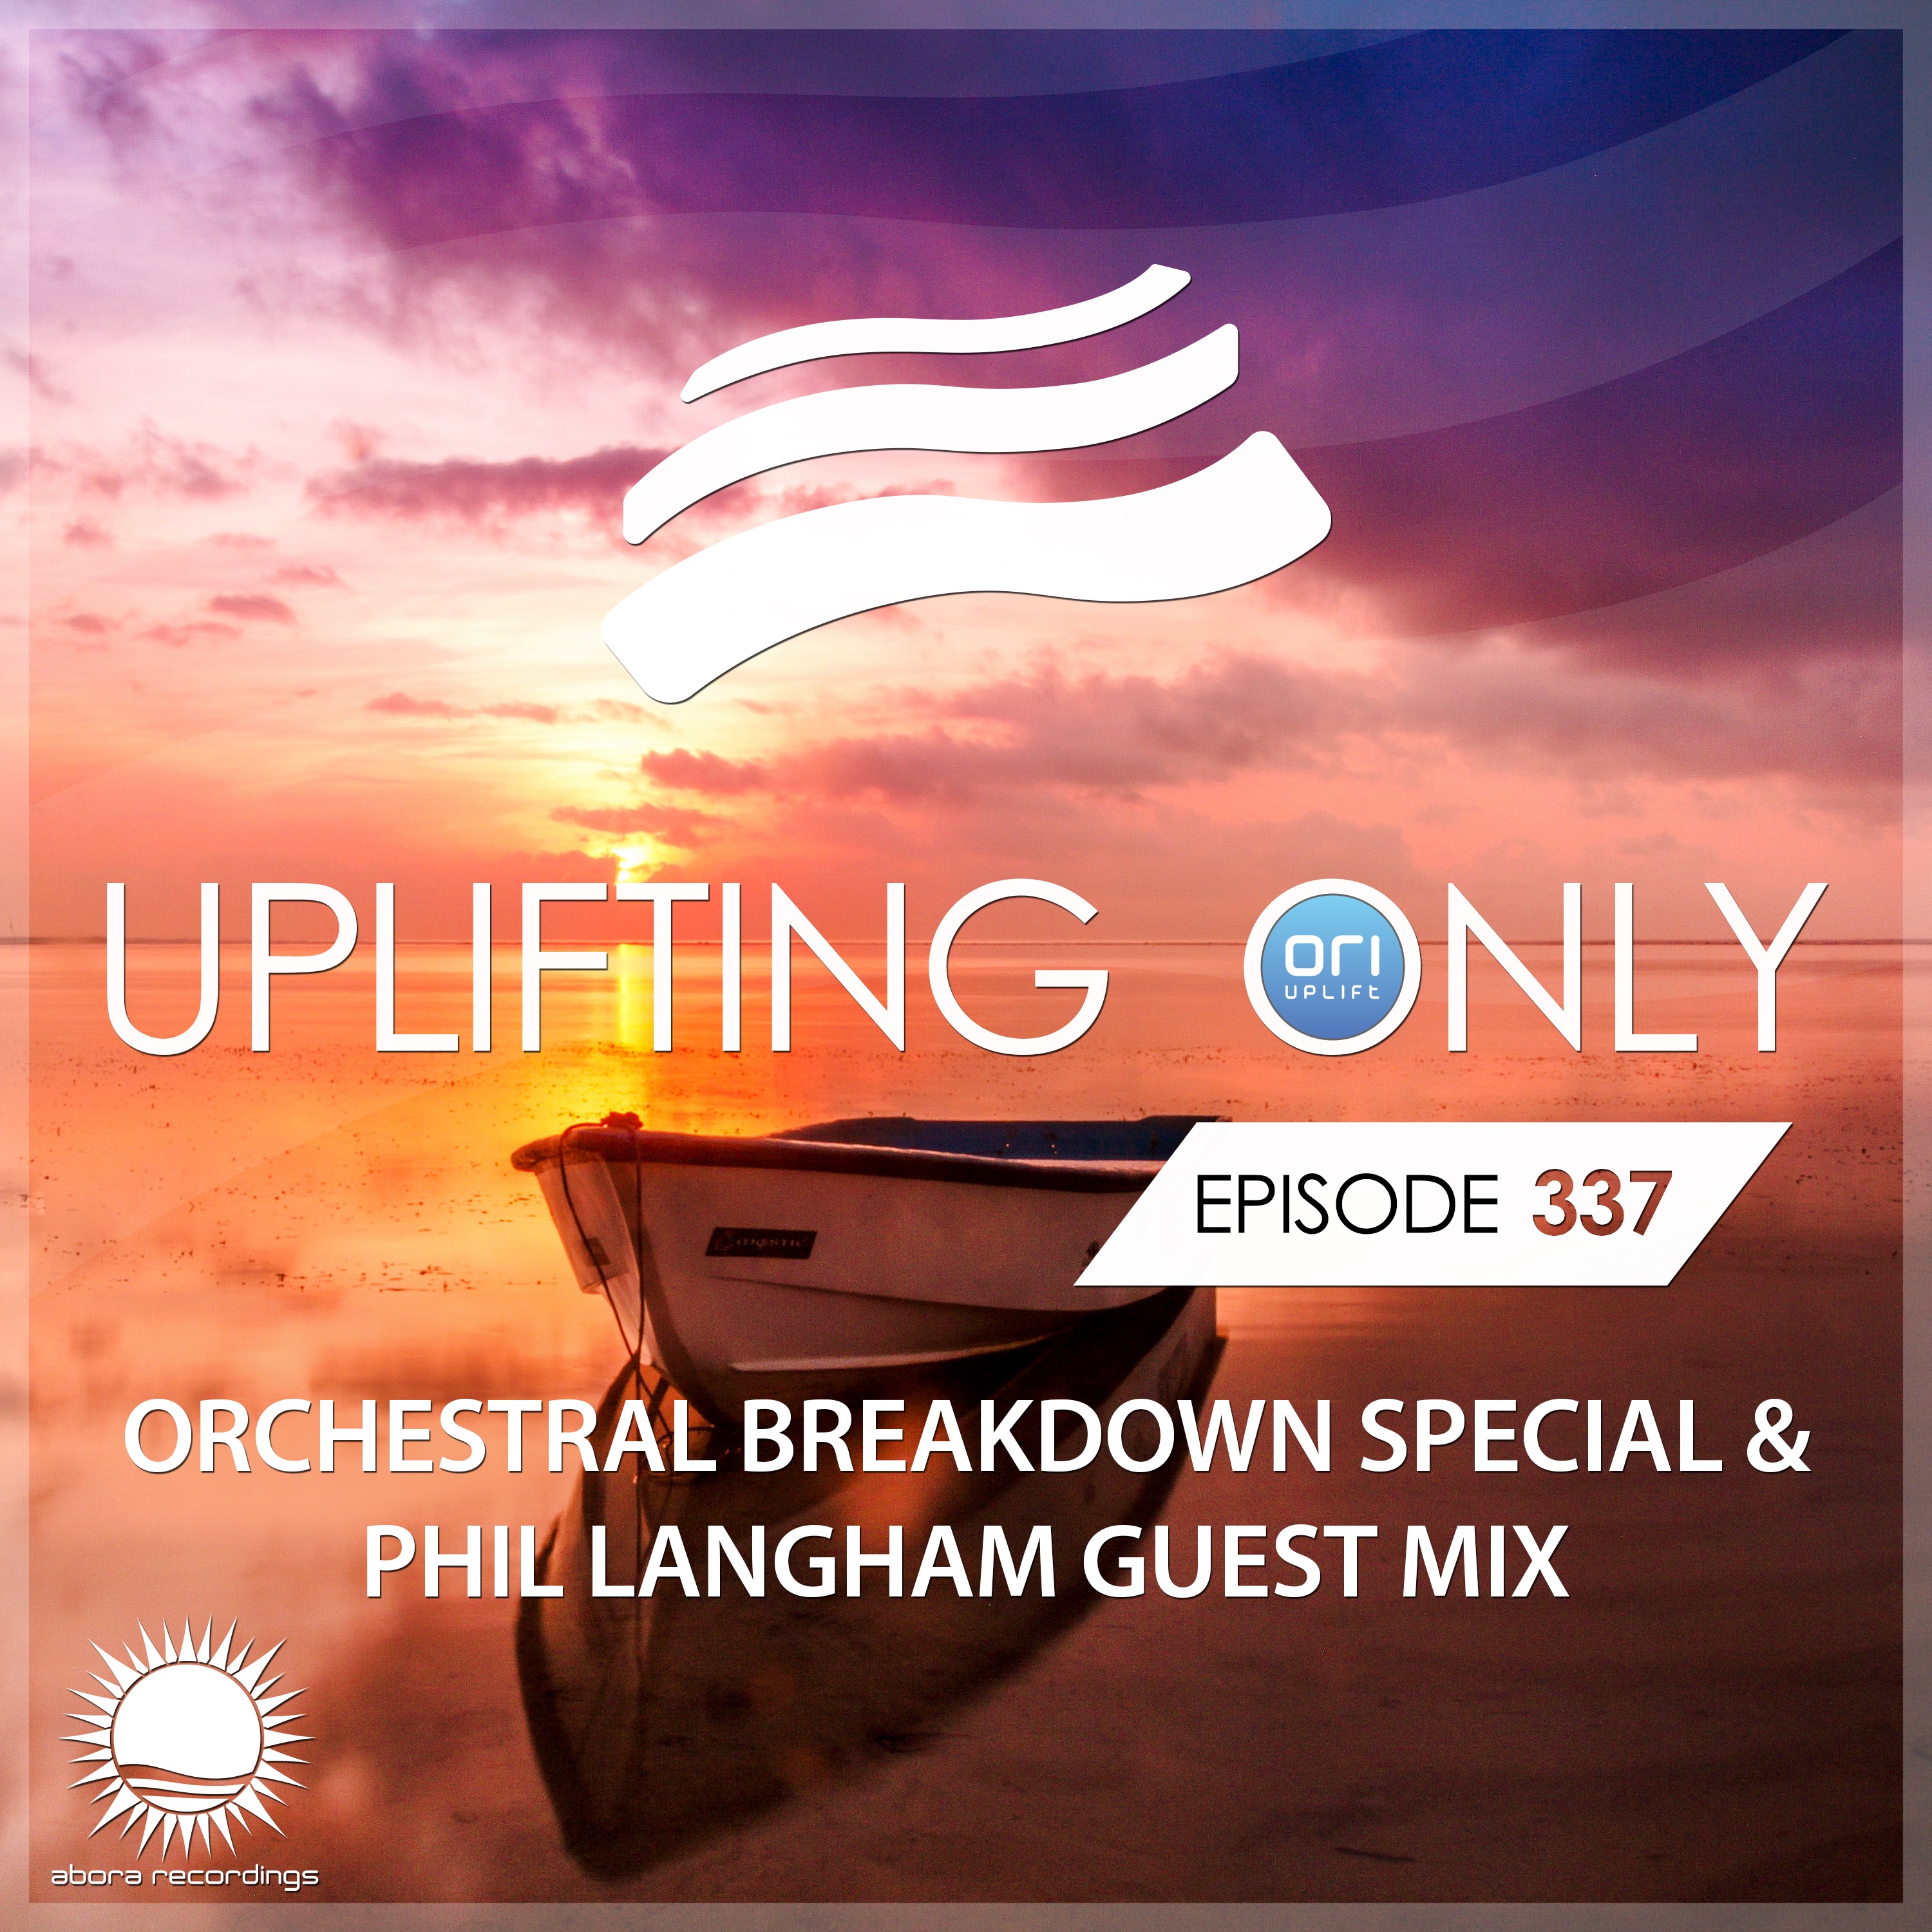 Only ep. Uplifting. Illitheas & Johannes Fischer - tears of hope. Etasonic when you're gone Sentimental Mix.